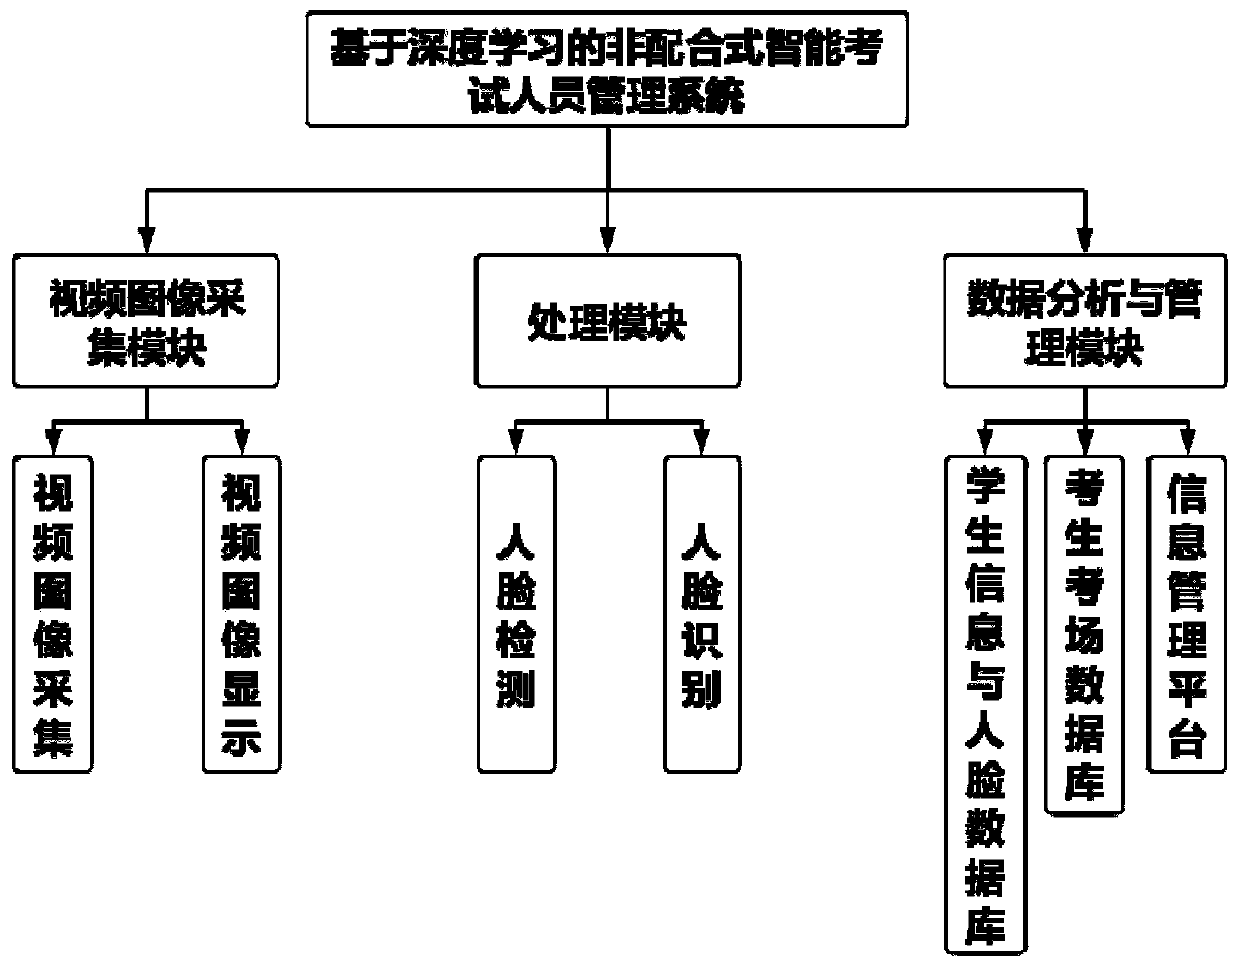 Non-cooperative examination personnel management method and system based on deep learning